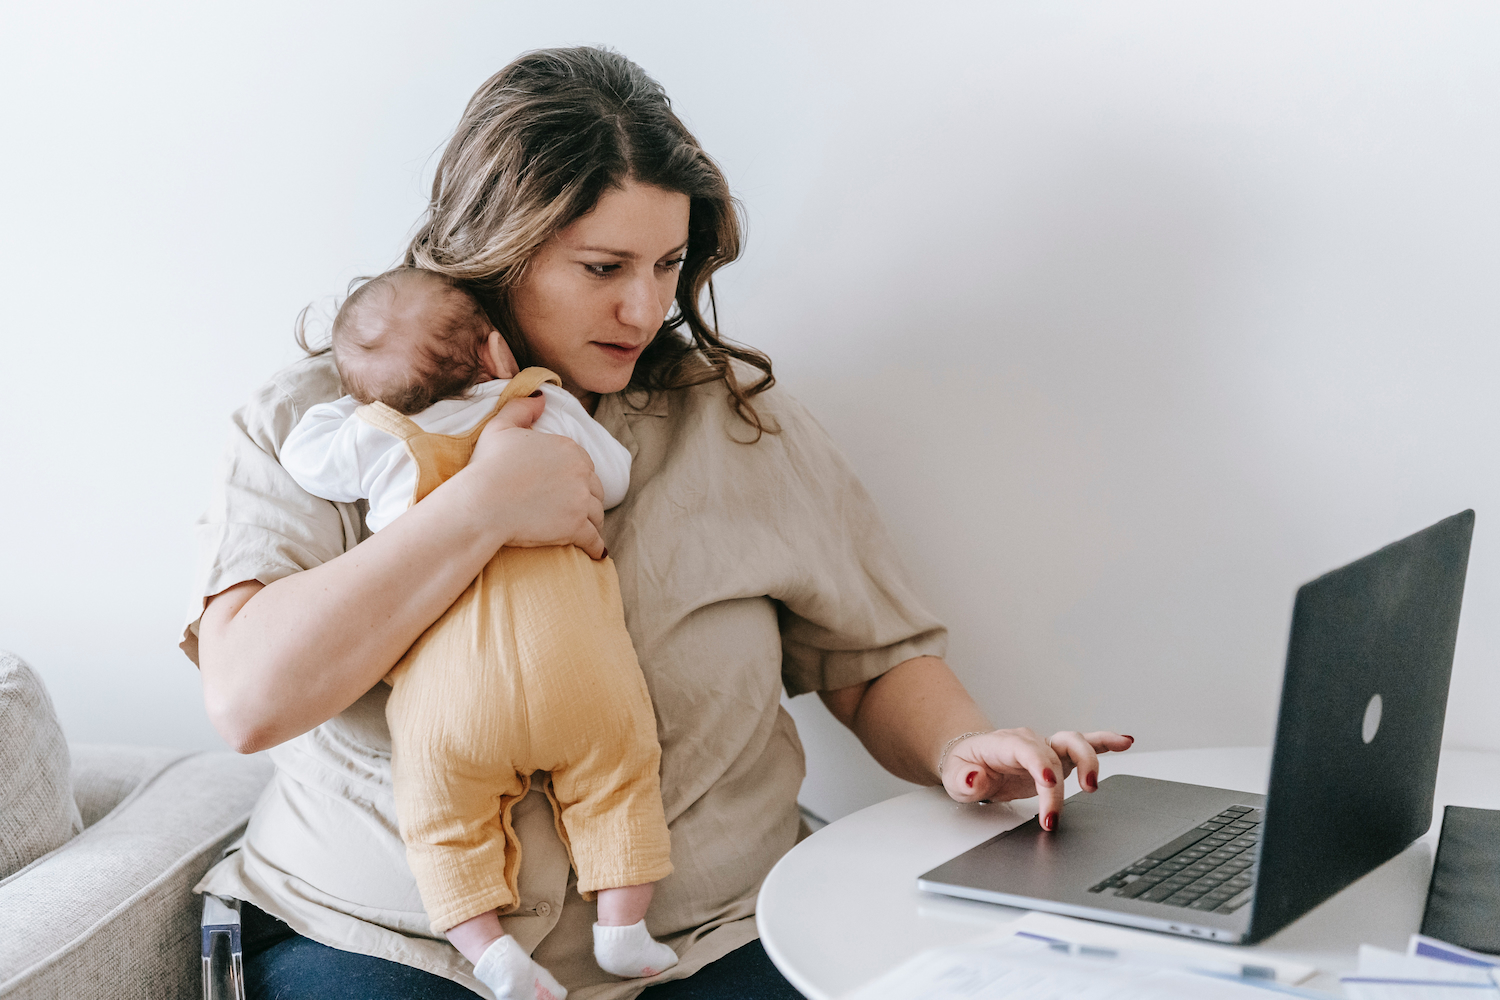  Workplace wellness trends is depicted with a working mom juggles baby care with work